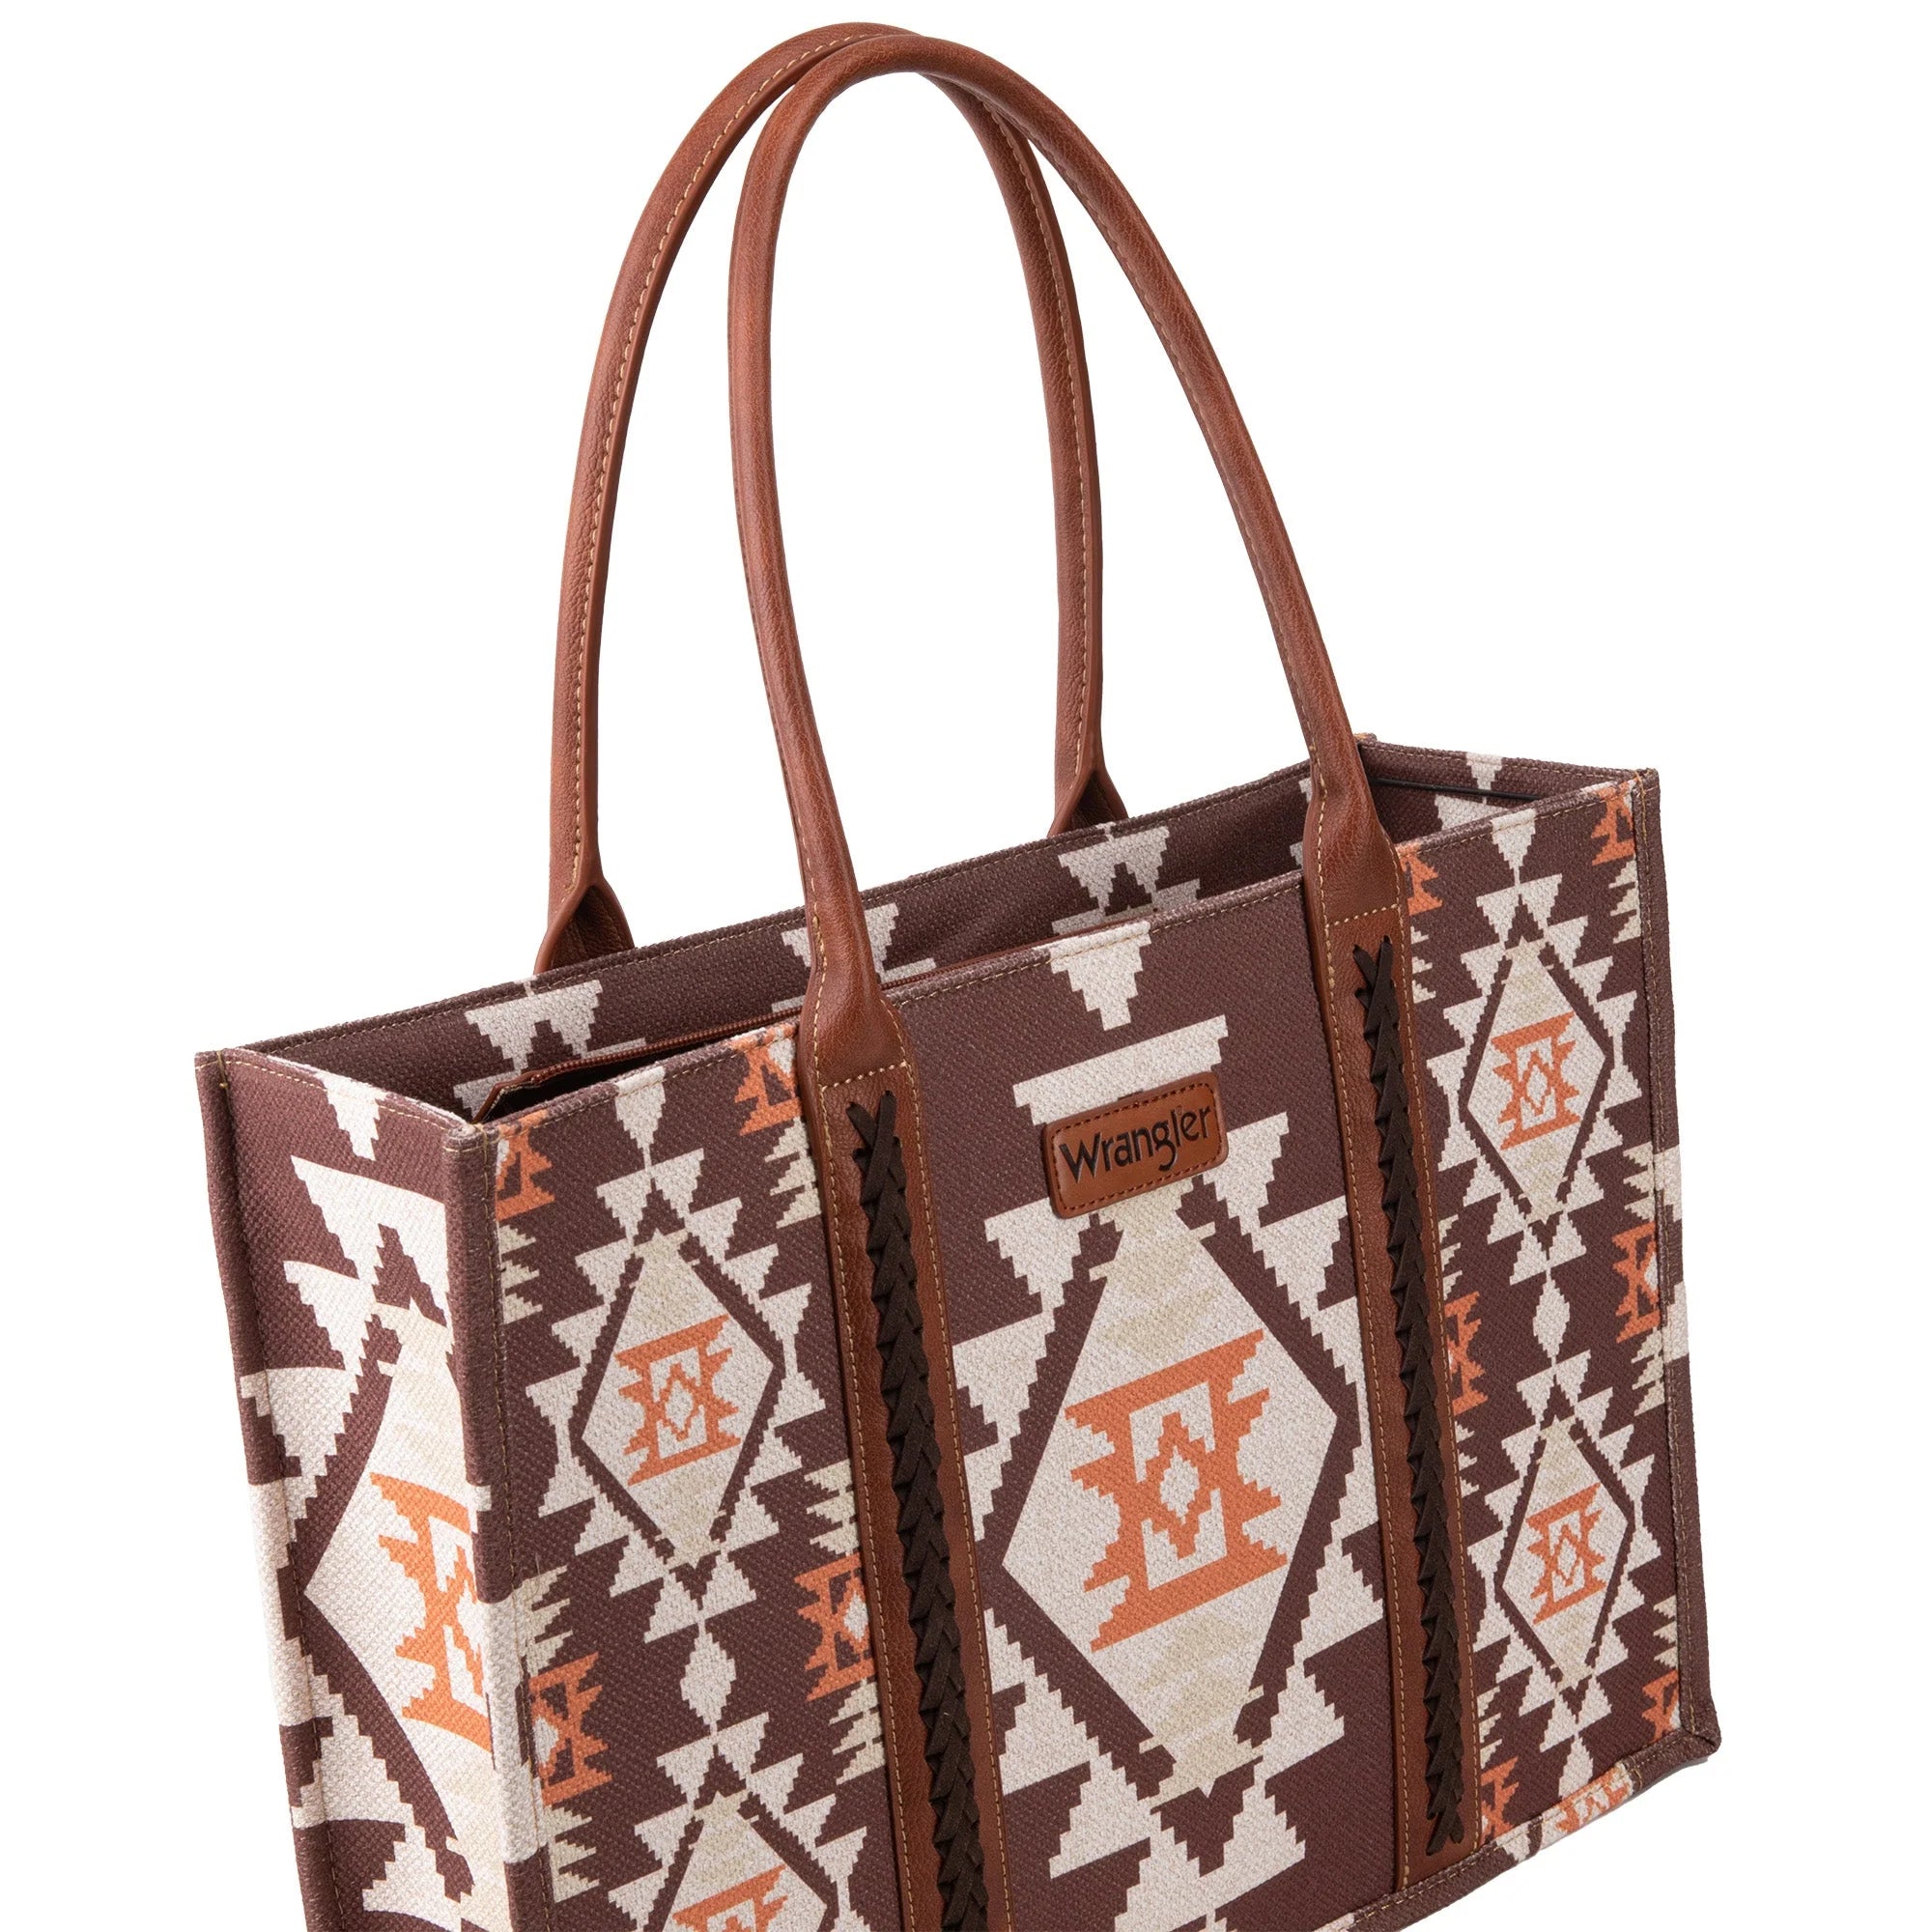 Wrangler Tote Coffee- New Fall Style!